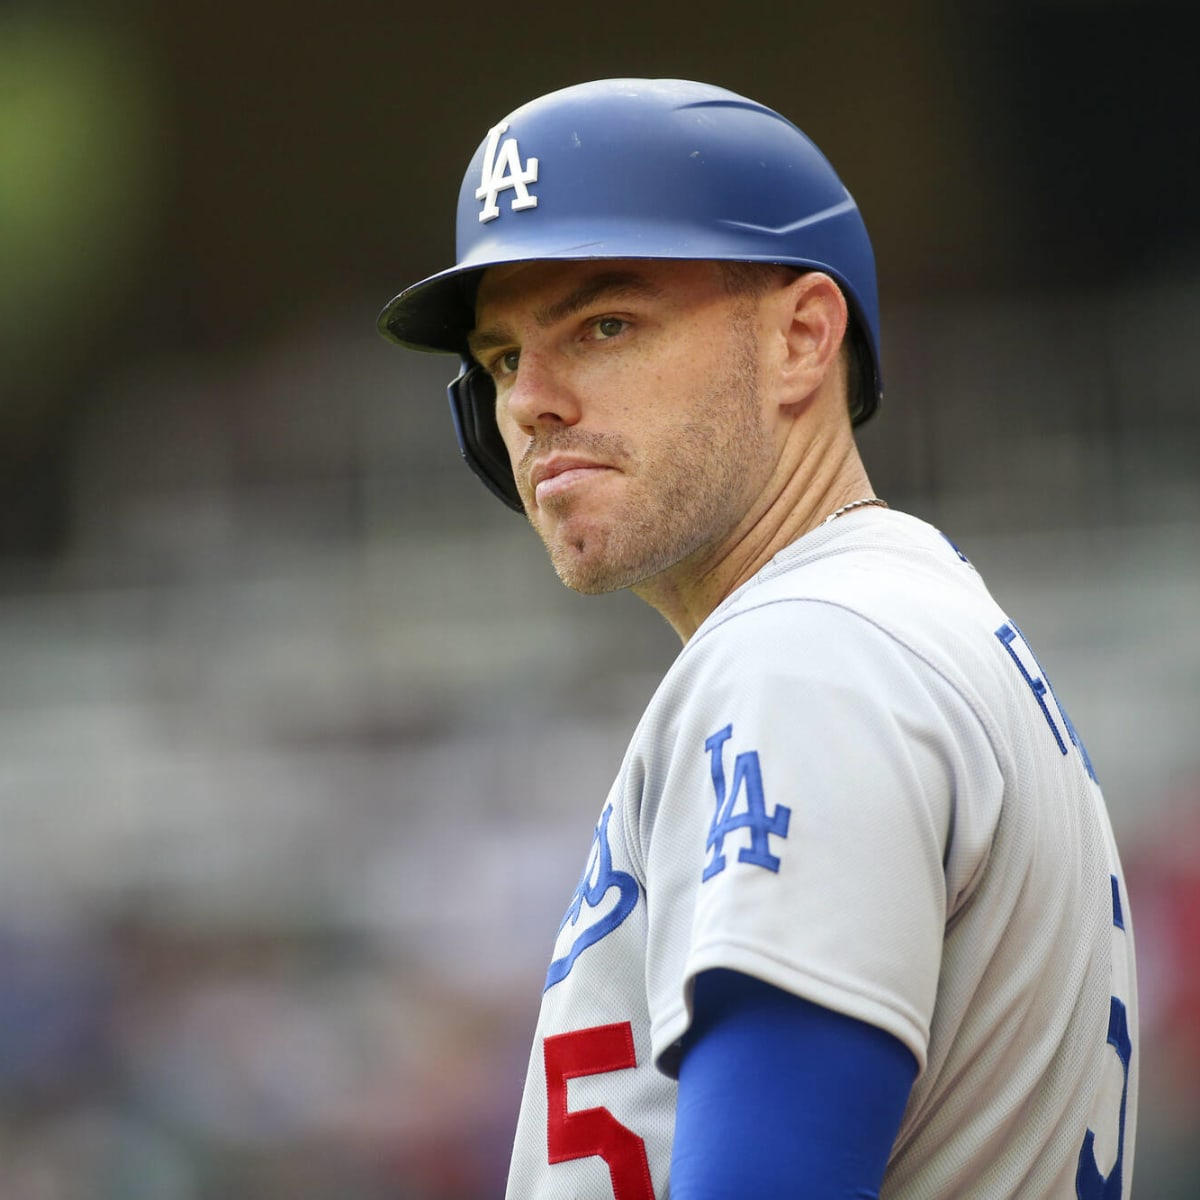 Freddie Freeman of the Los Angeles Dodgers warms up on deck during